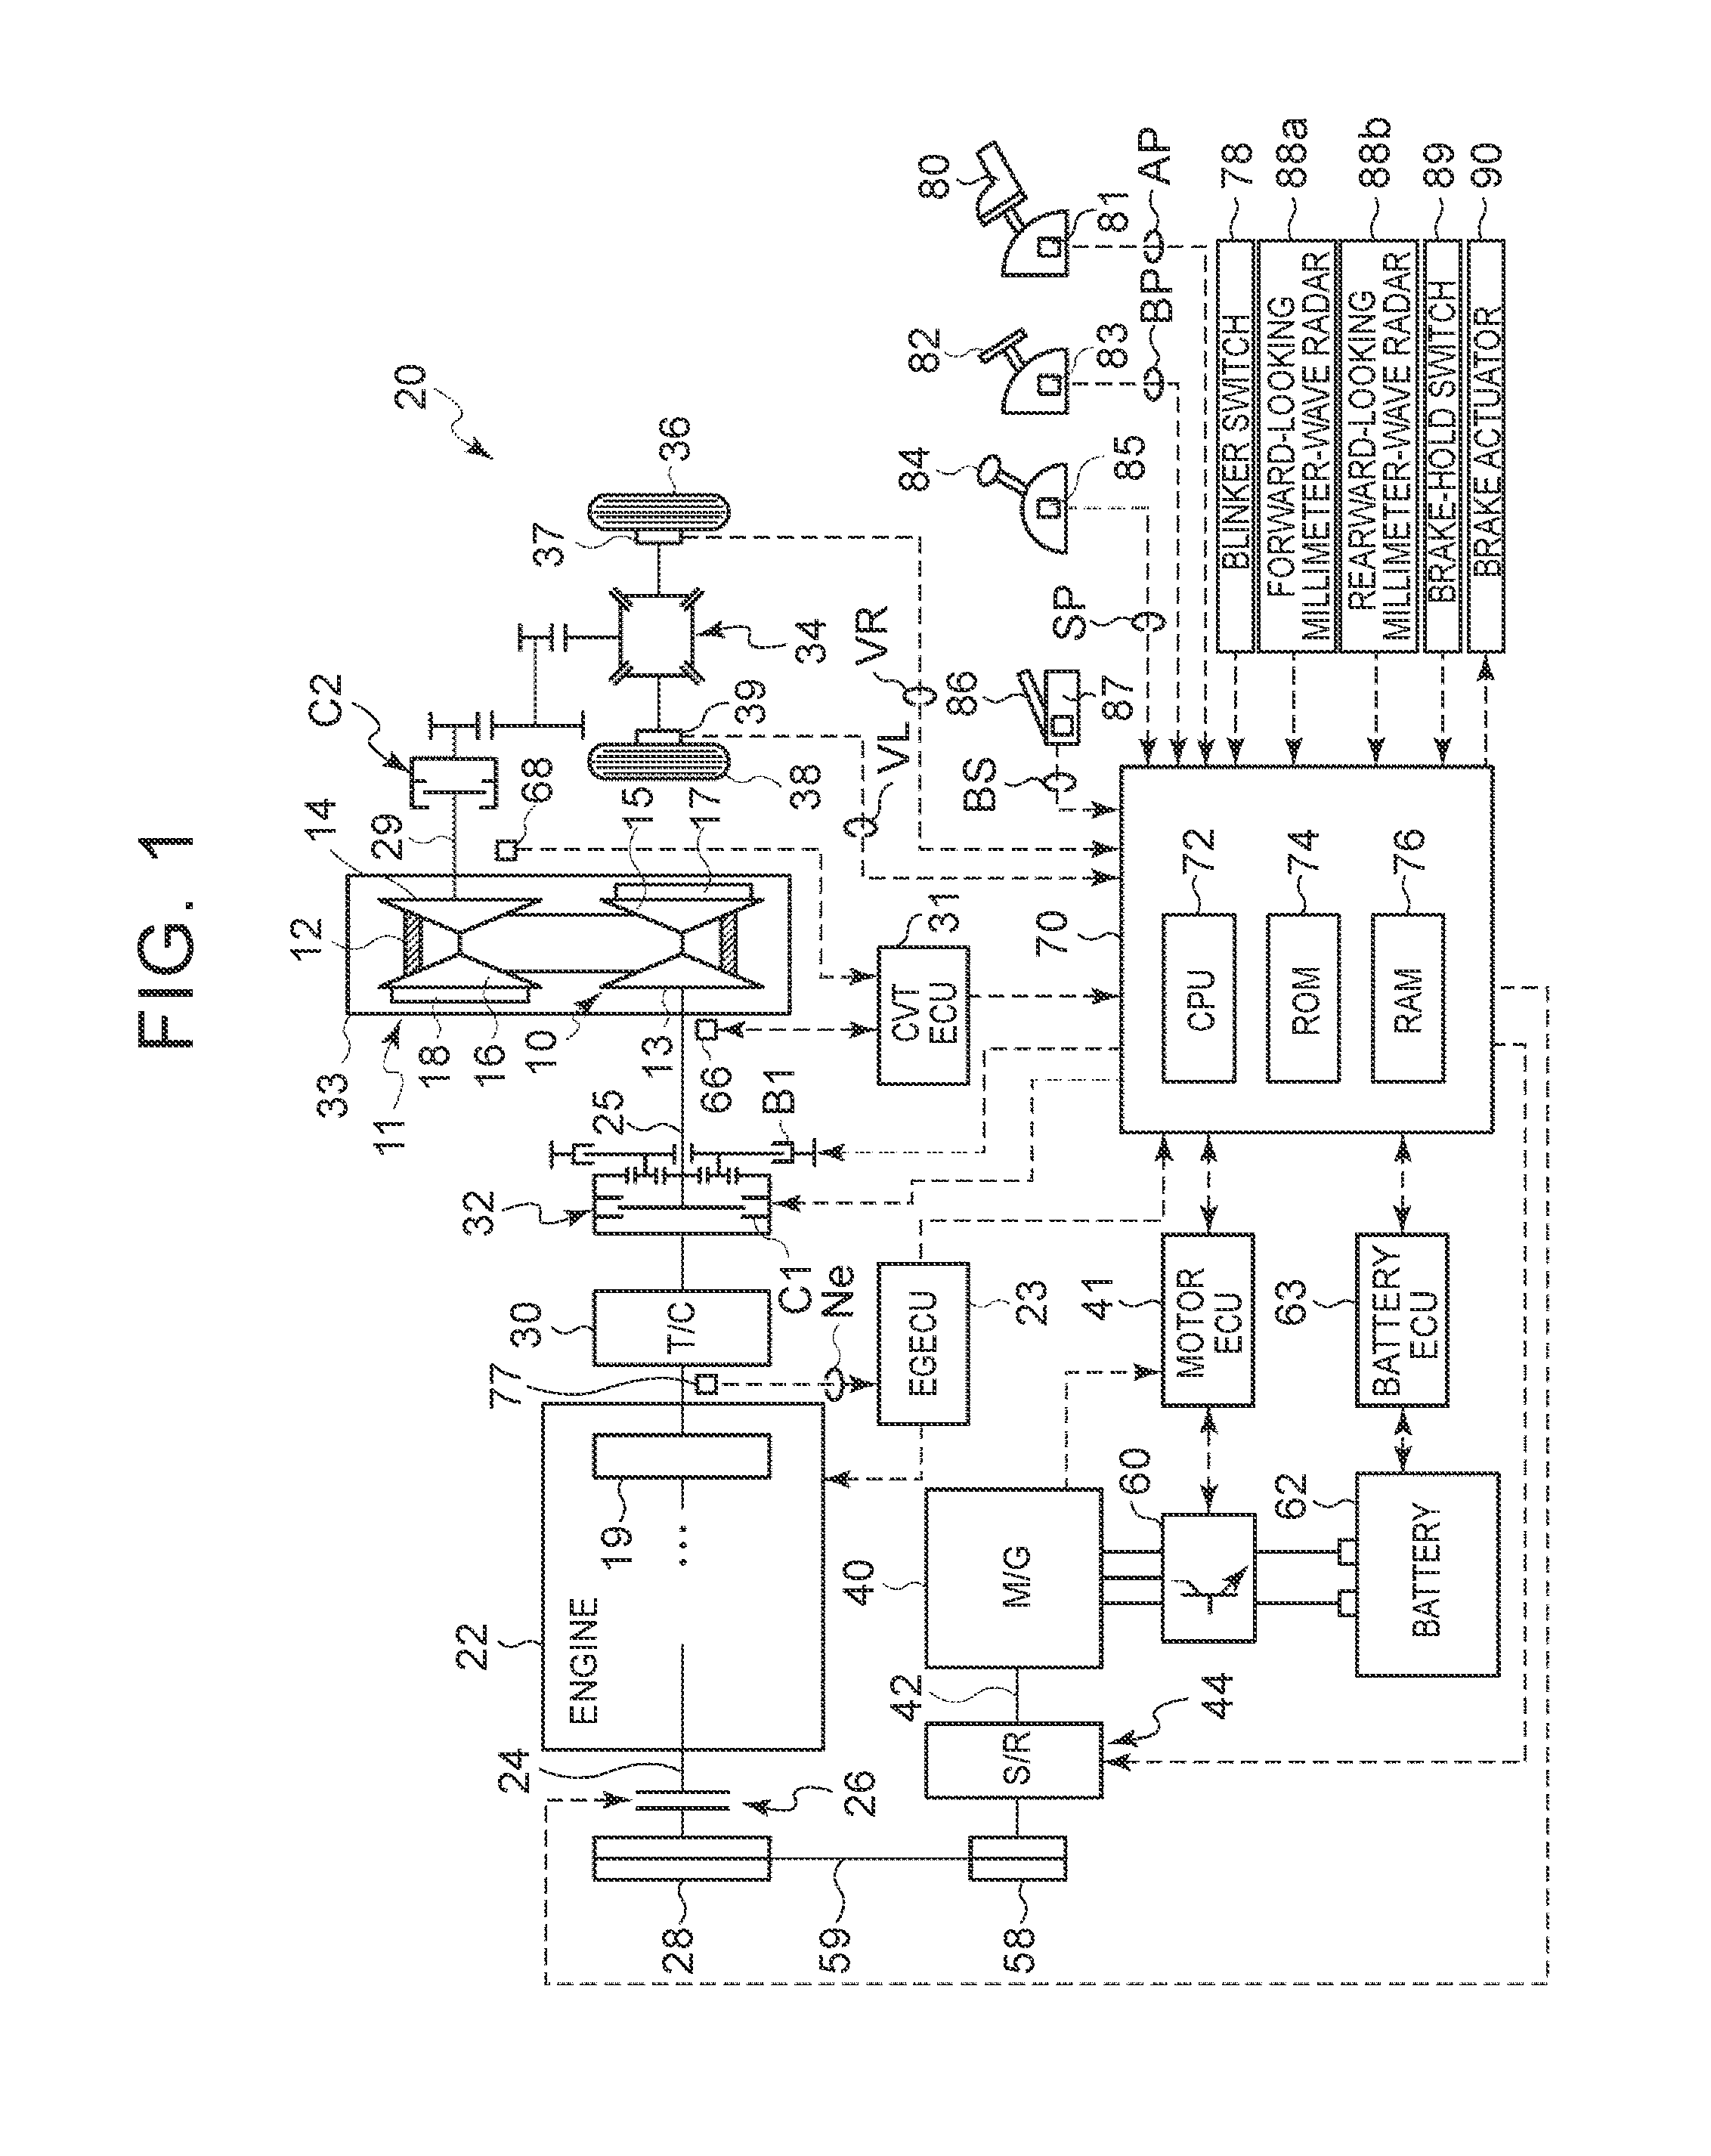 Control system for vehicle